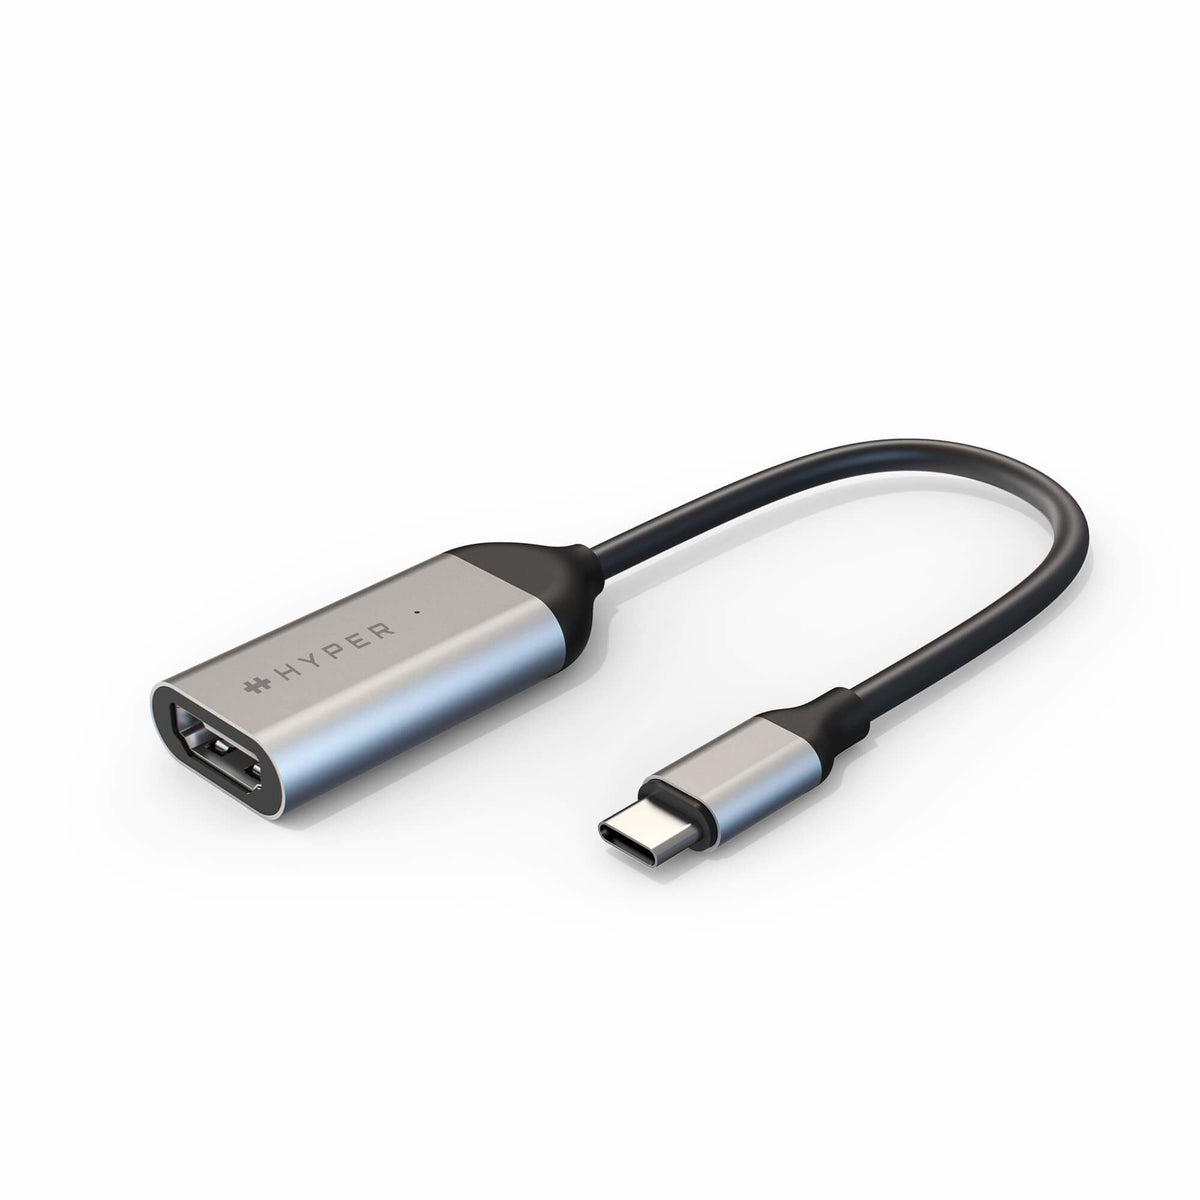 HyperDrive - Video Adapter - USB-C Male to HDMI Female - 4K60Hz support